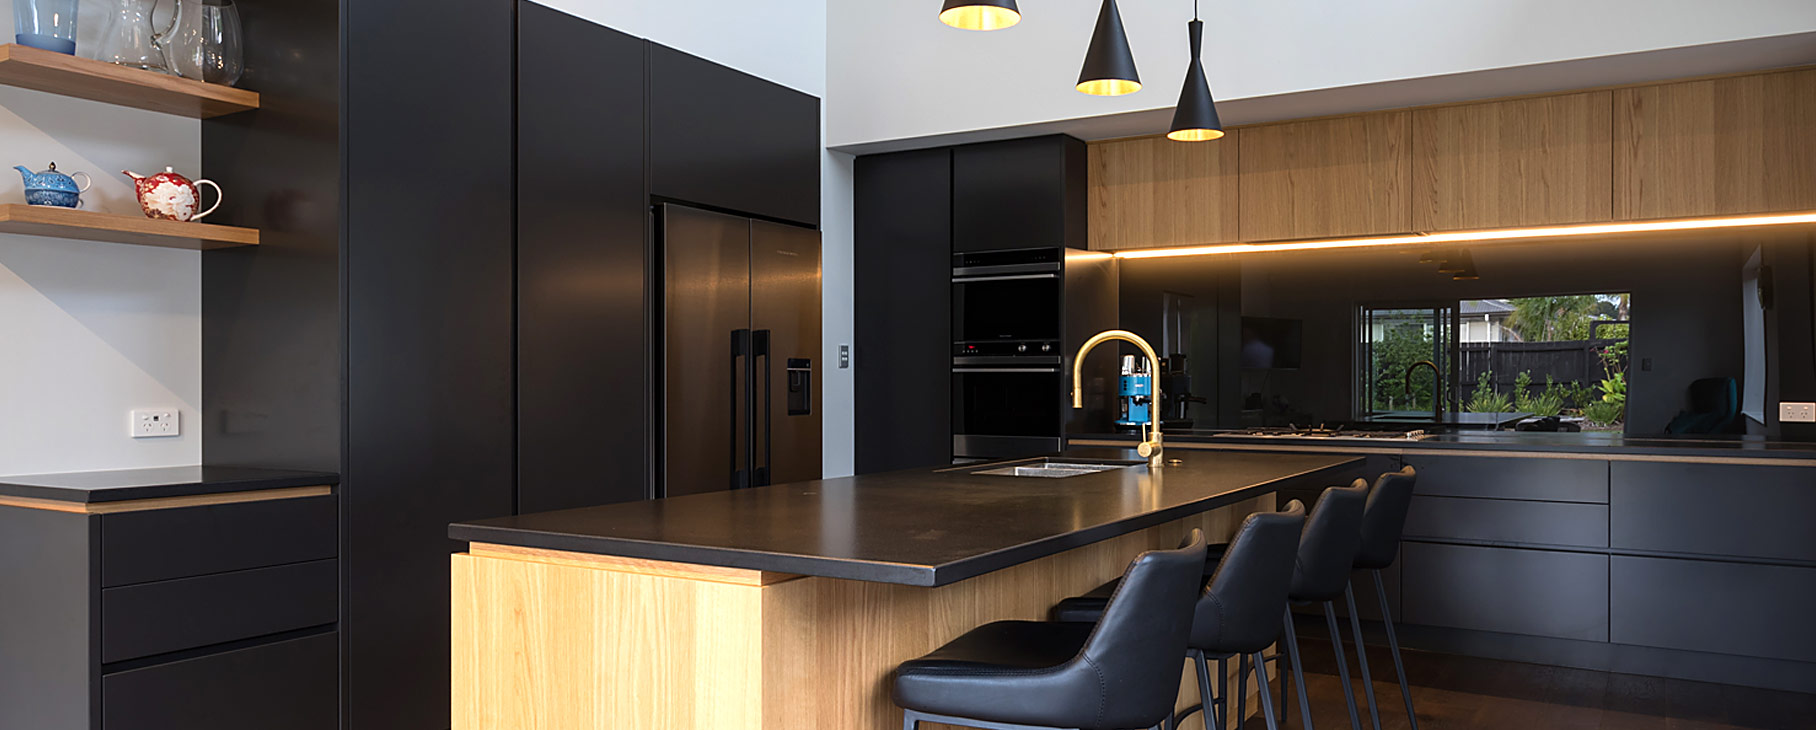 Top Quality Kitchen Design NZ | Bathrooms & Joinery | Neo Design